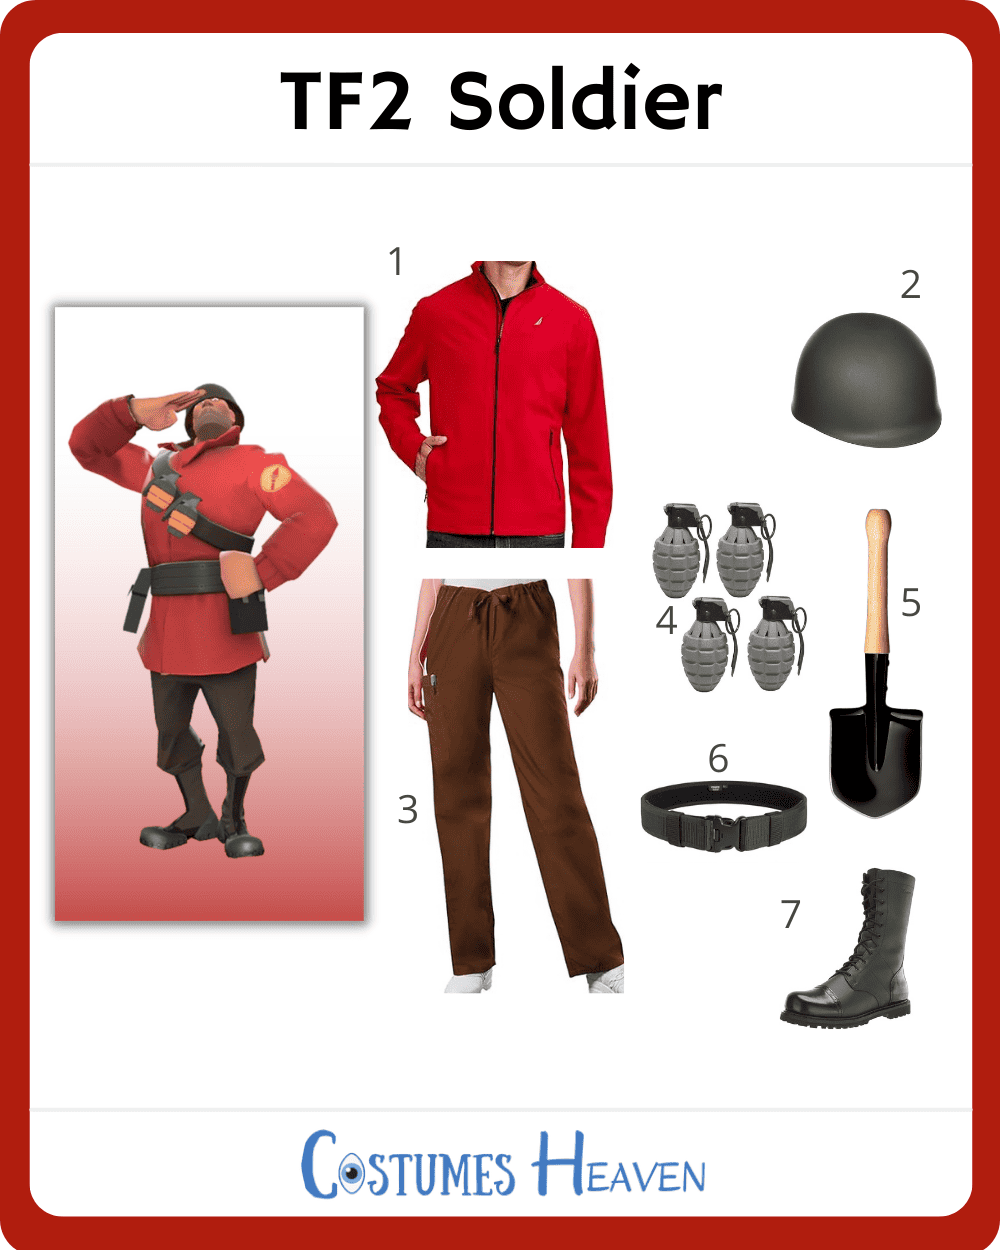 TF2 Soldier Costume